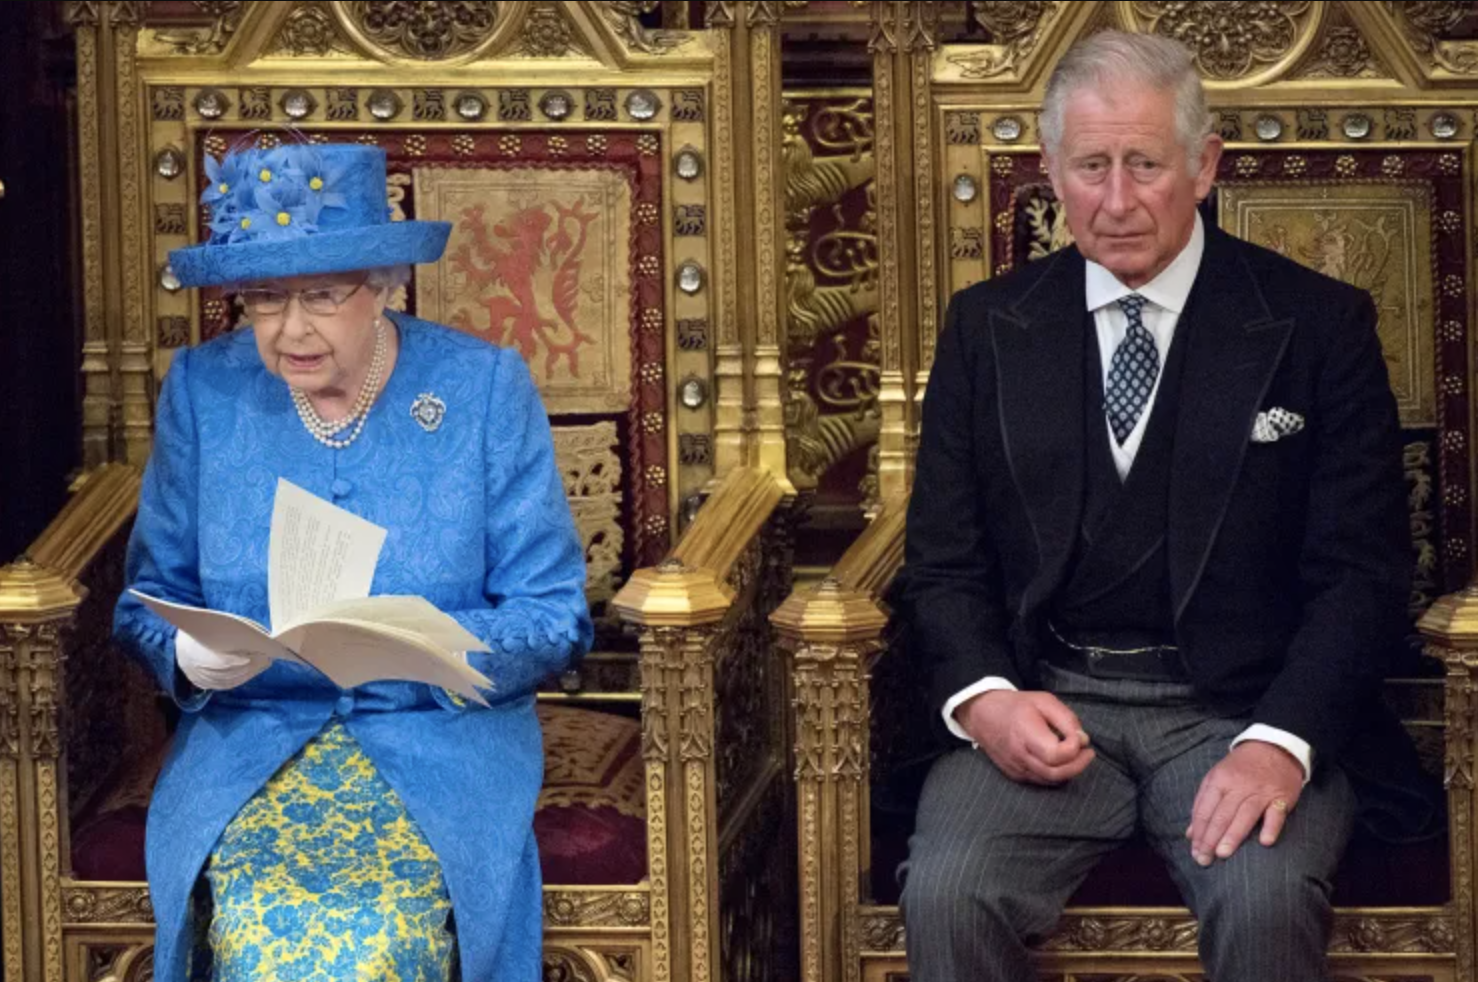 Charles looking excited for his turn on the throne